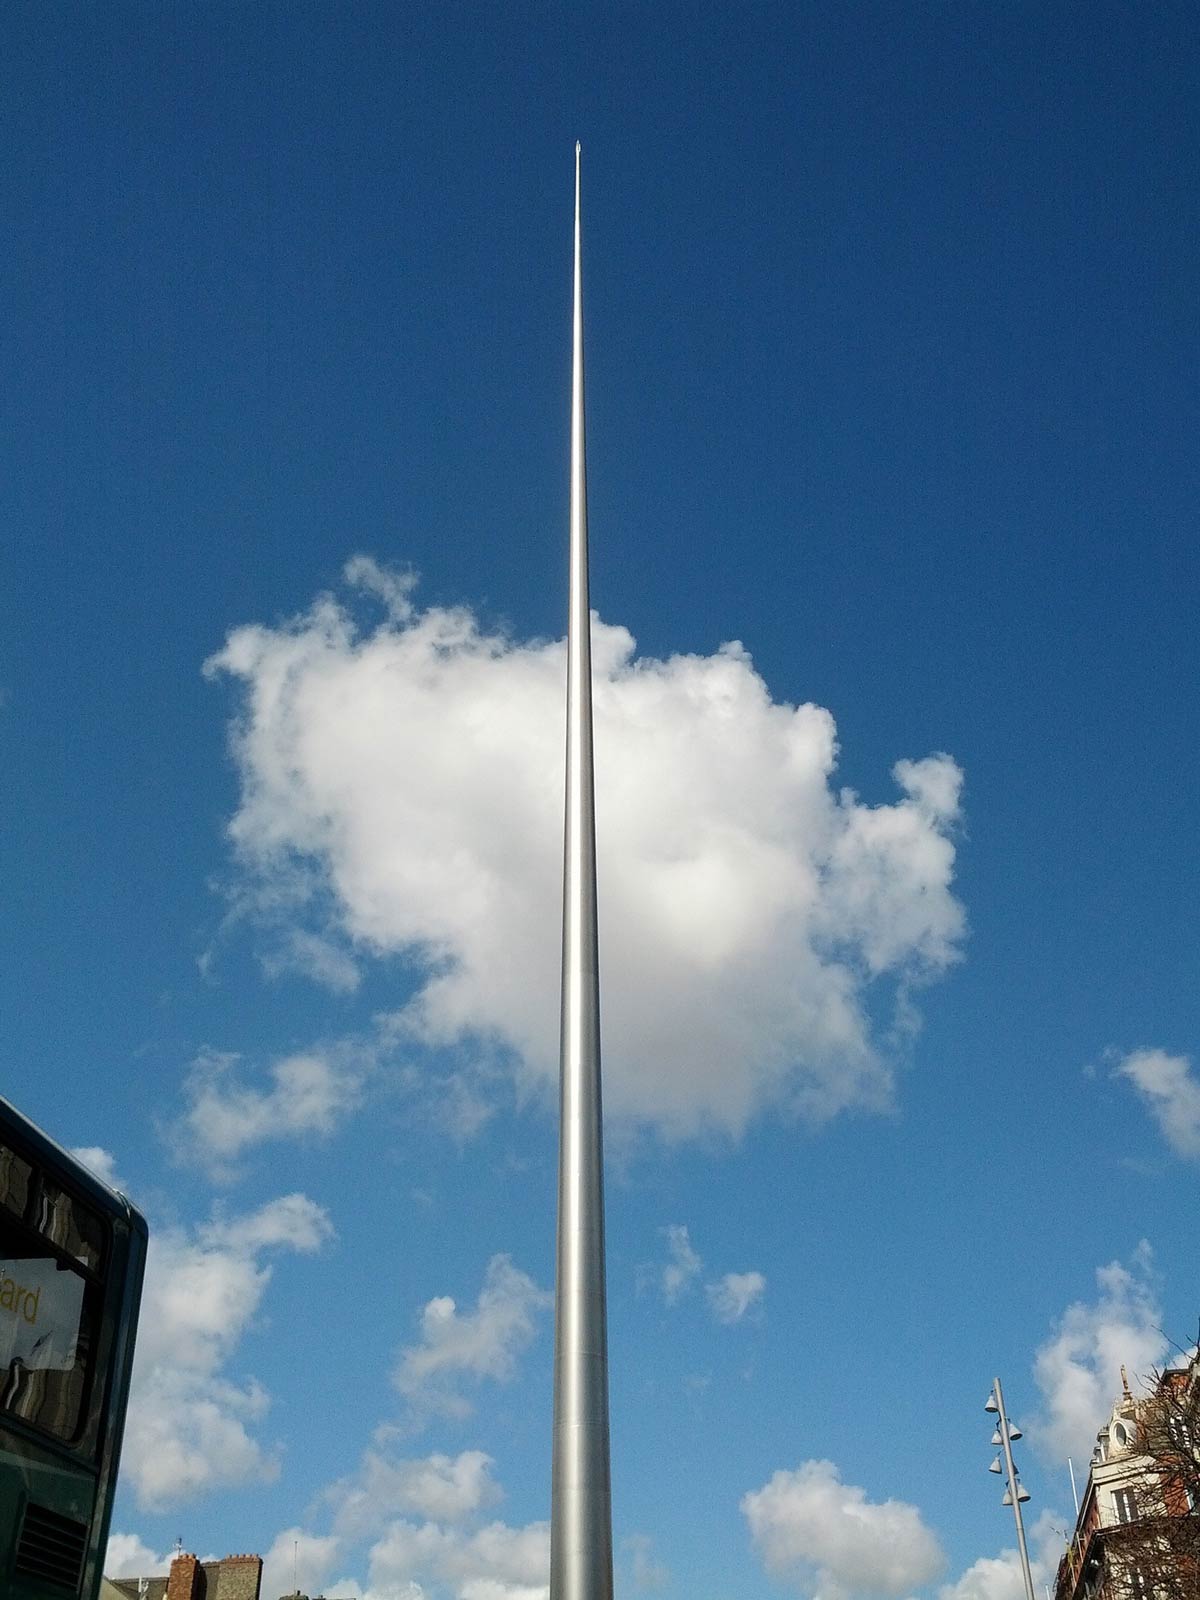 This Art Installation in Dublin, The Spire, €4,000,000